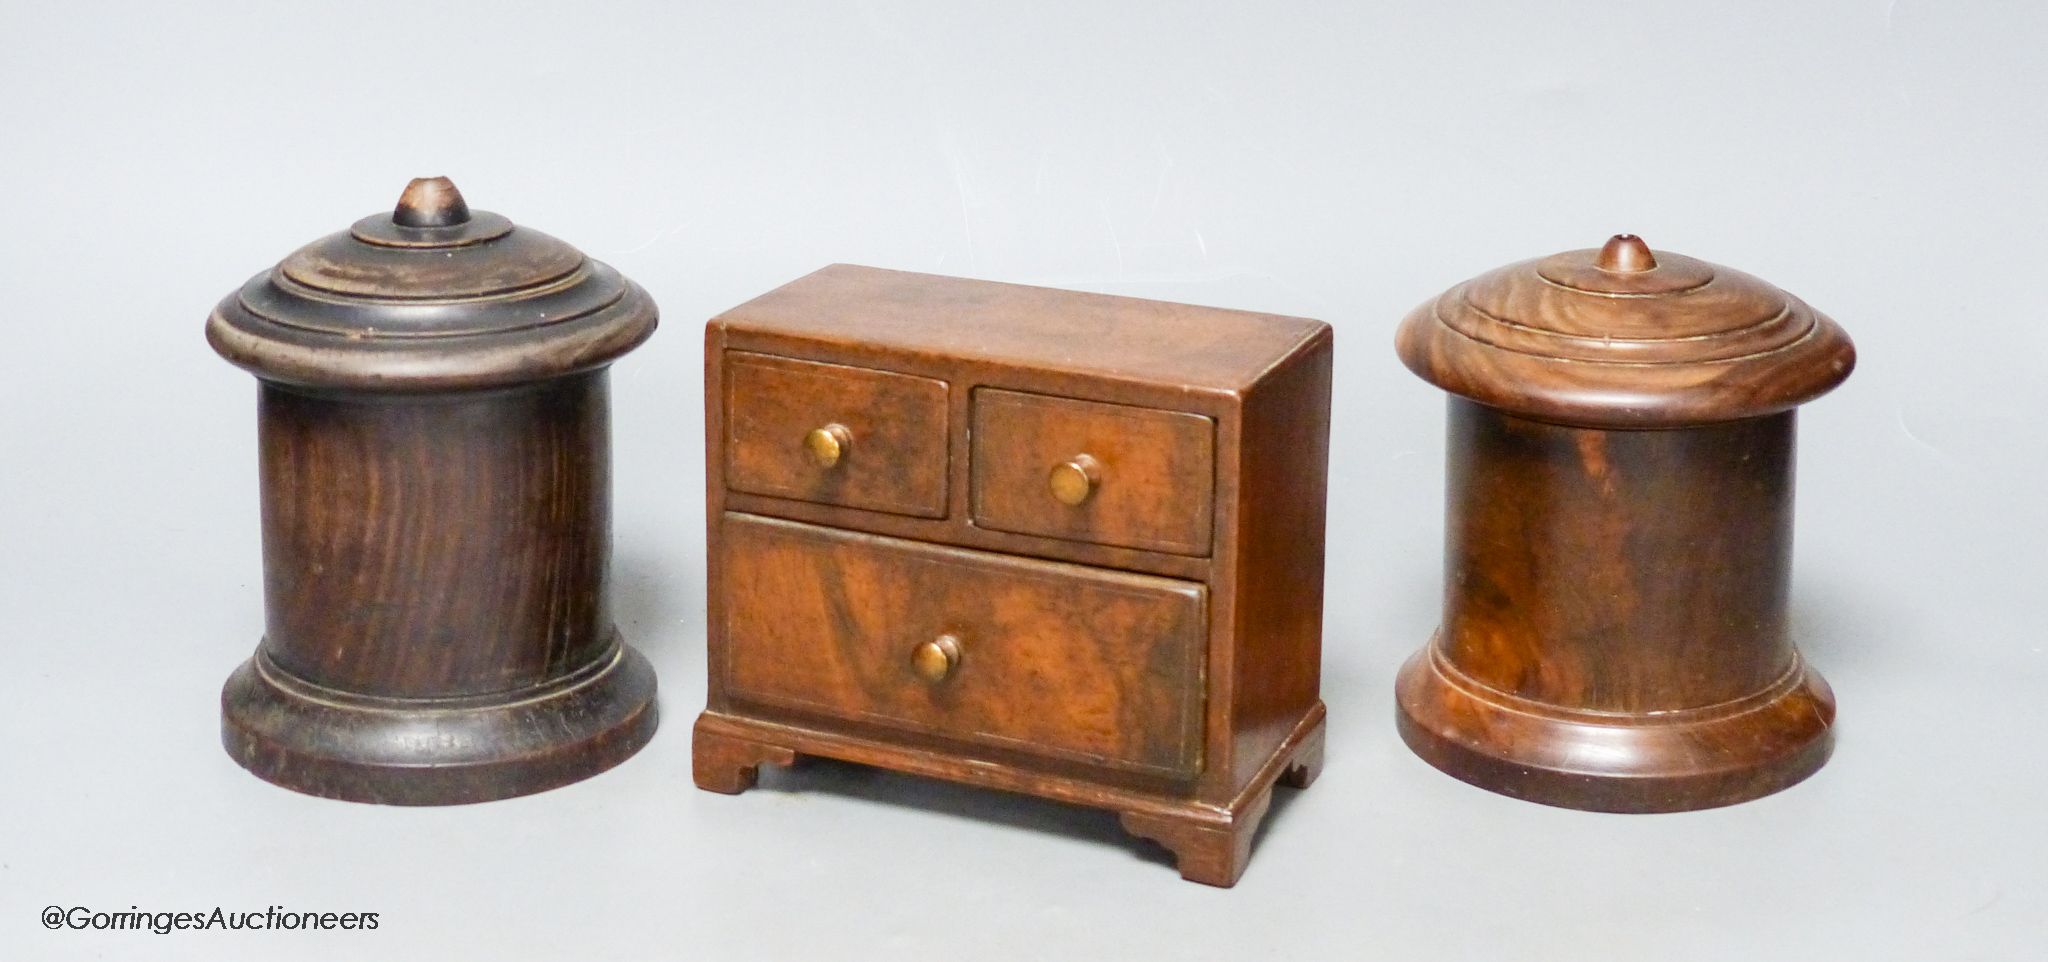 Two 19th-century Lignum vitae string boxes and a Georgian style walnut miniature chest of drawers, height 11.5cm width 13cm